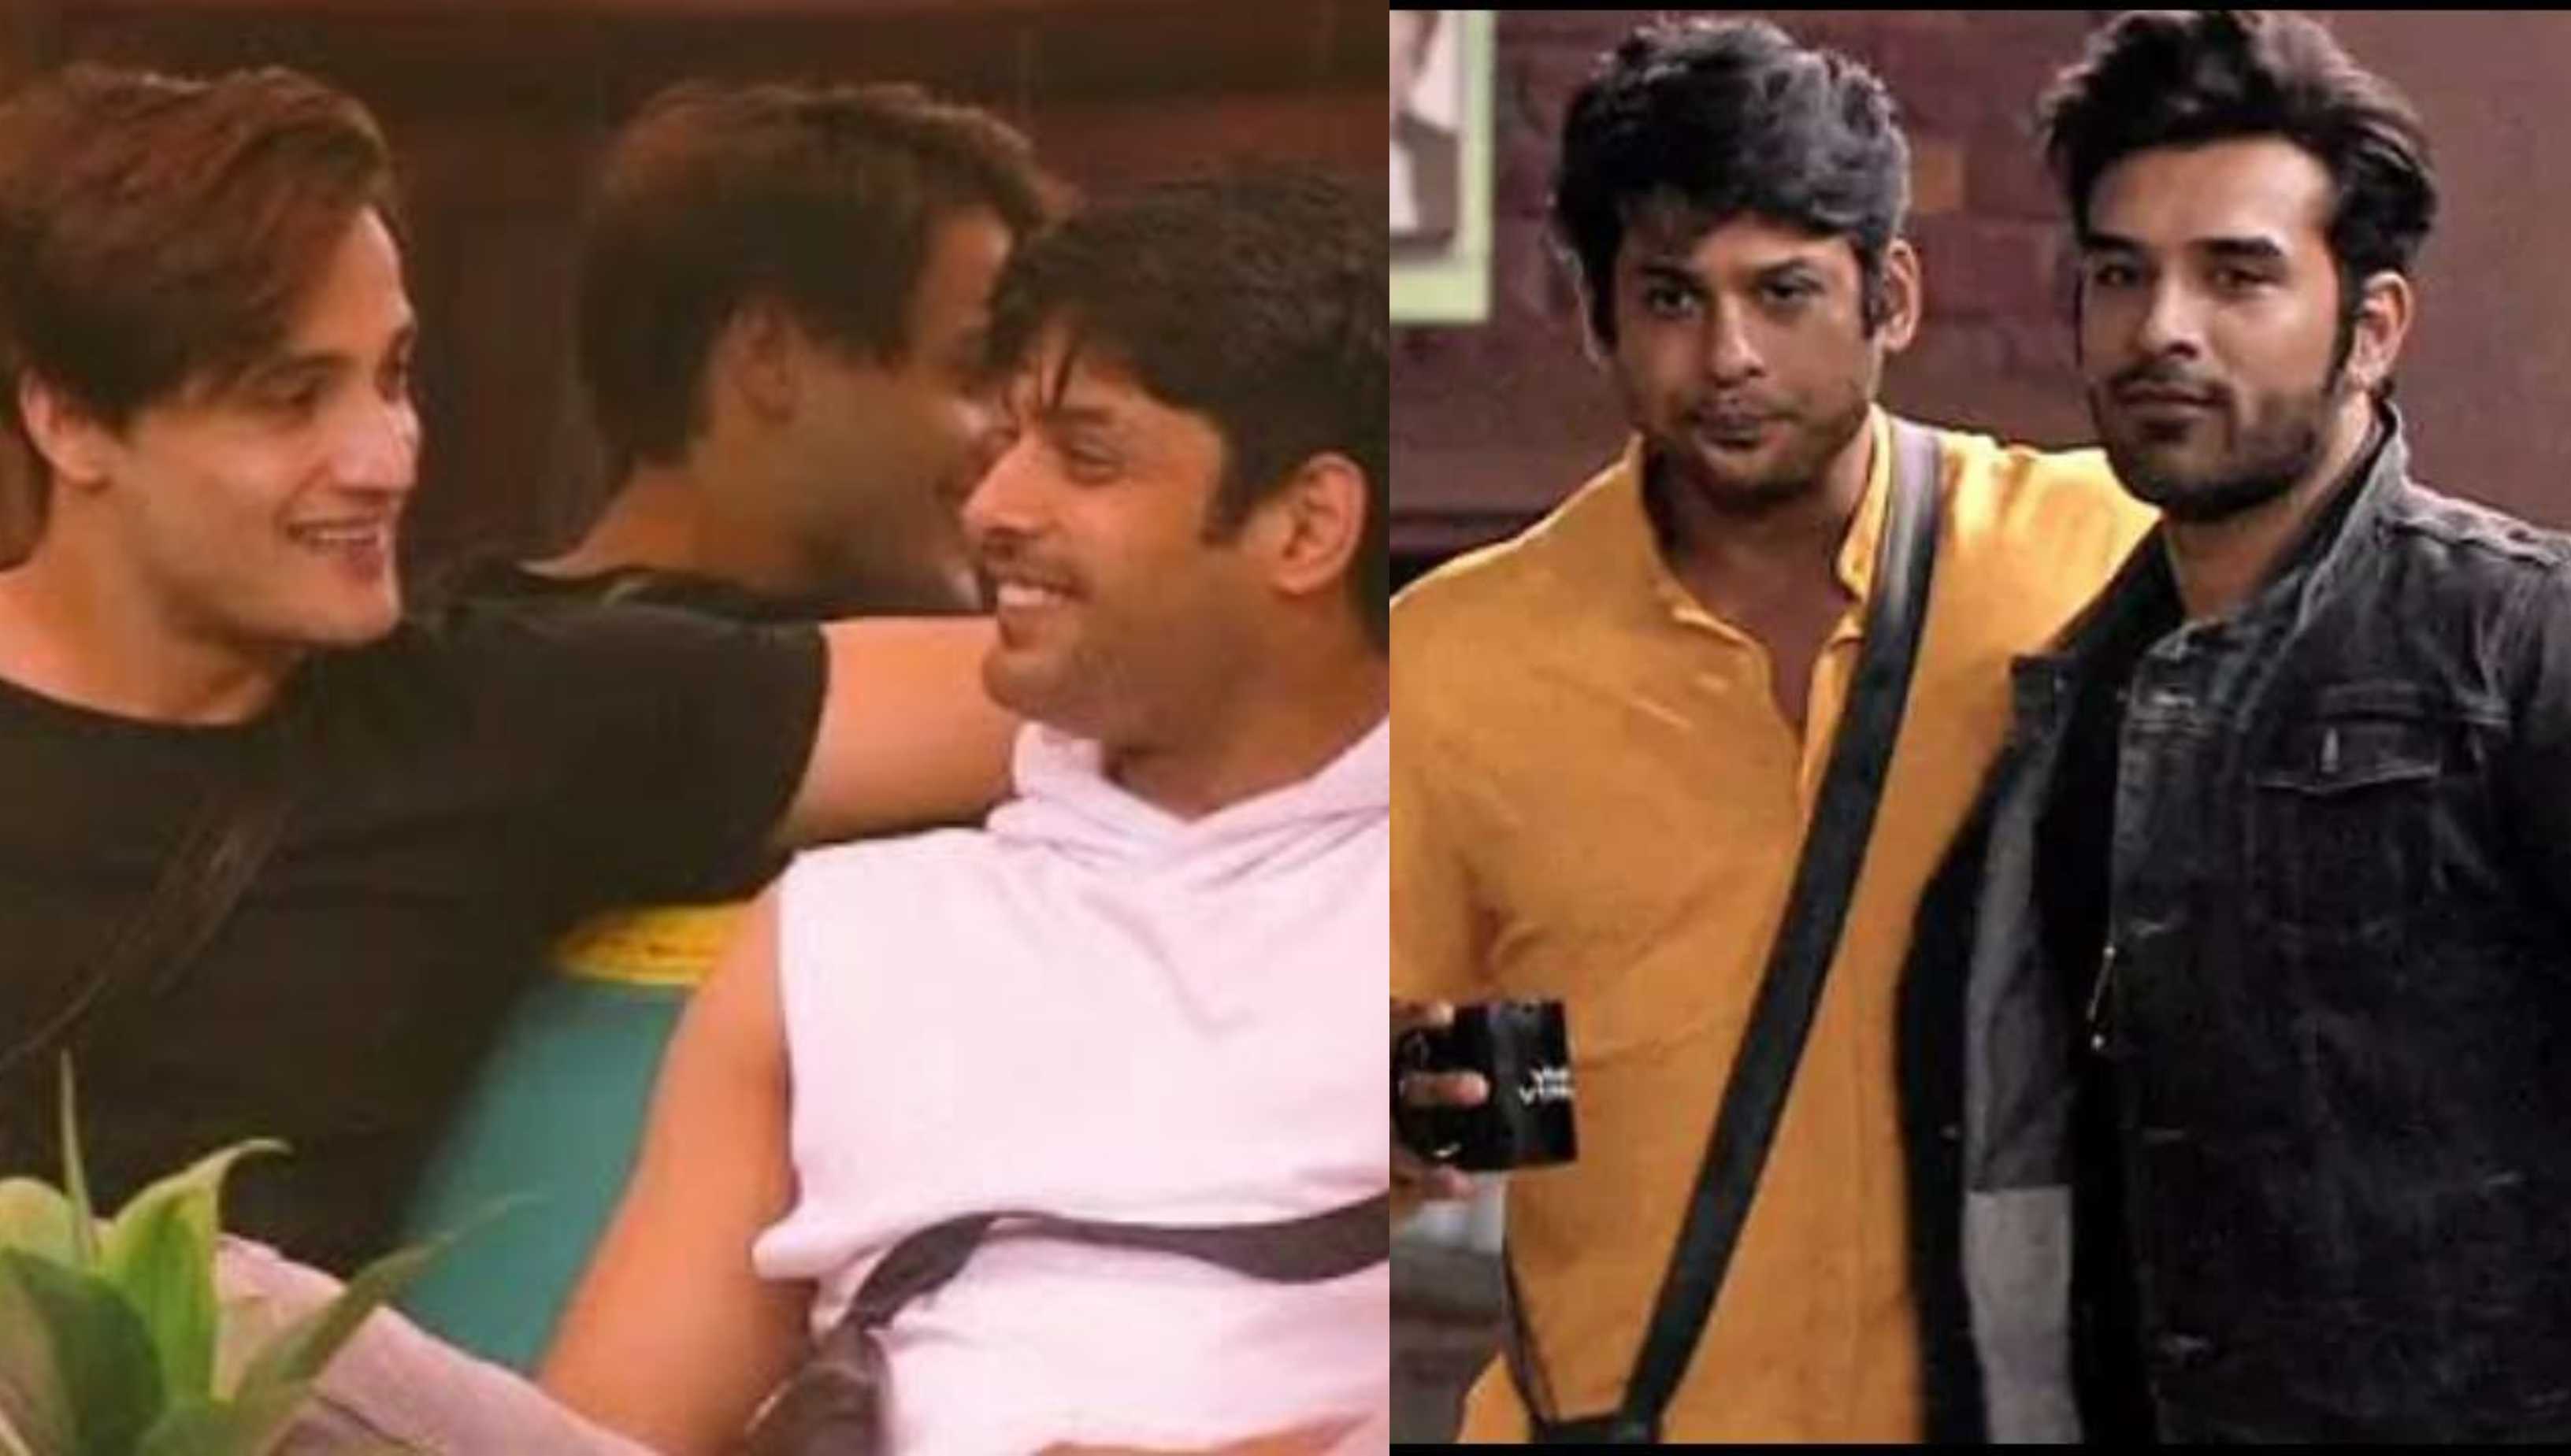 Apart from Shehnaaz Gill, these celebs shared a sweet bond with Sidharth Shukla in Bigg Boss 13